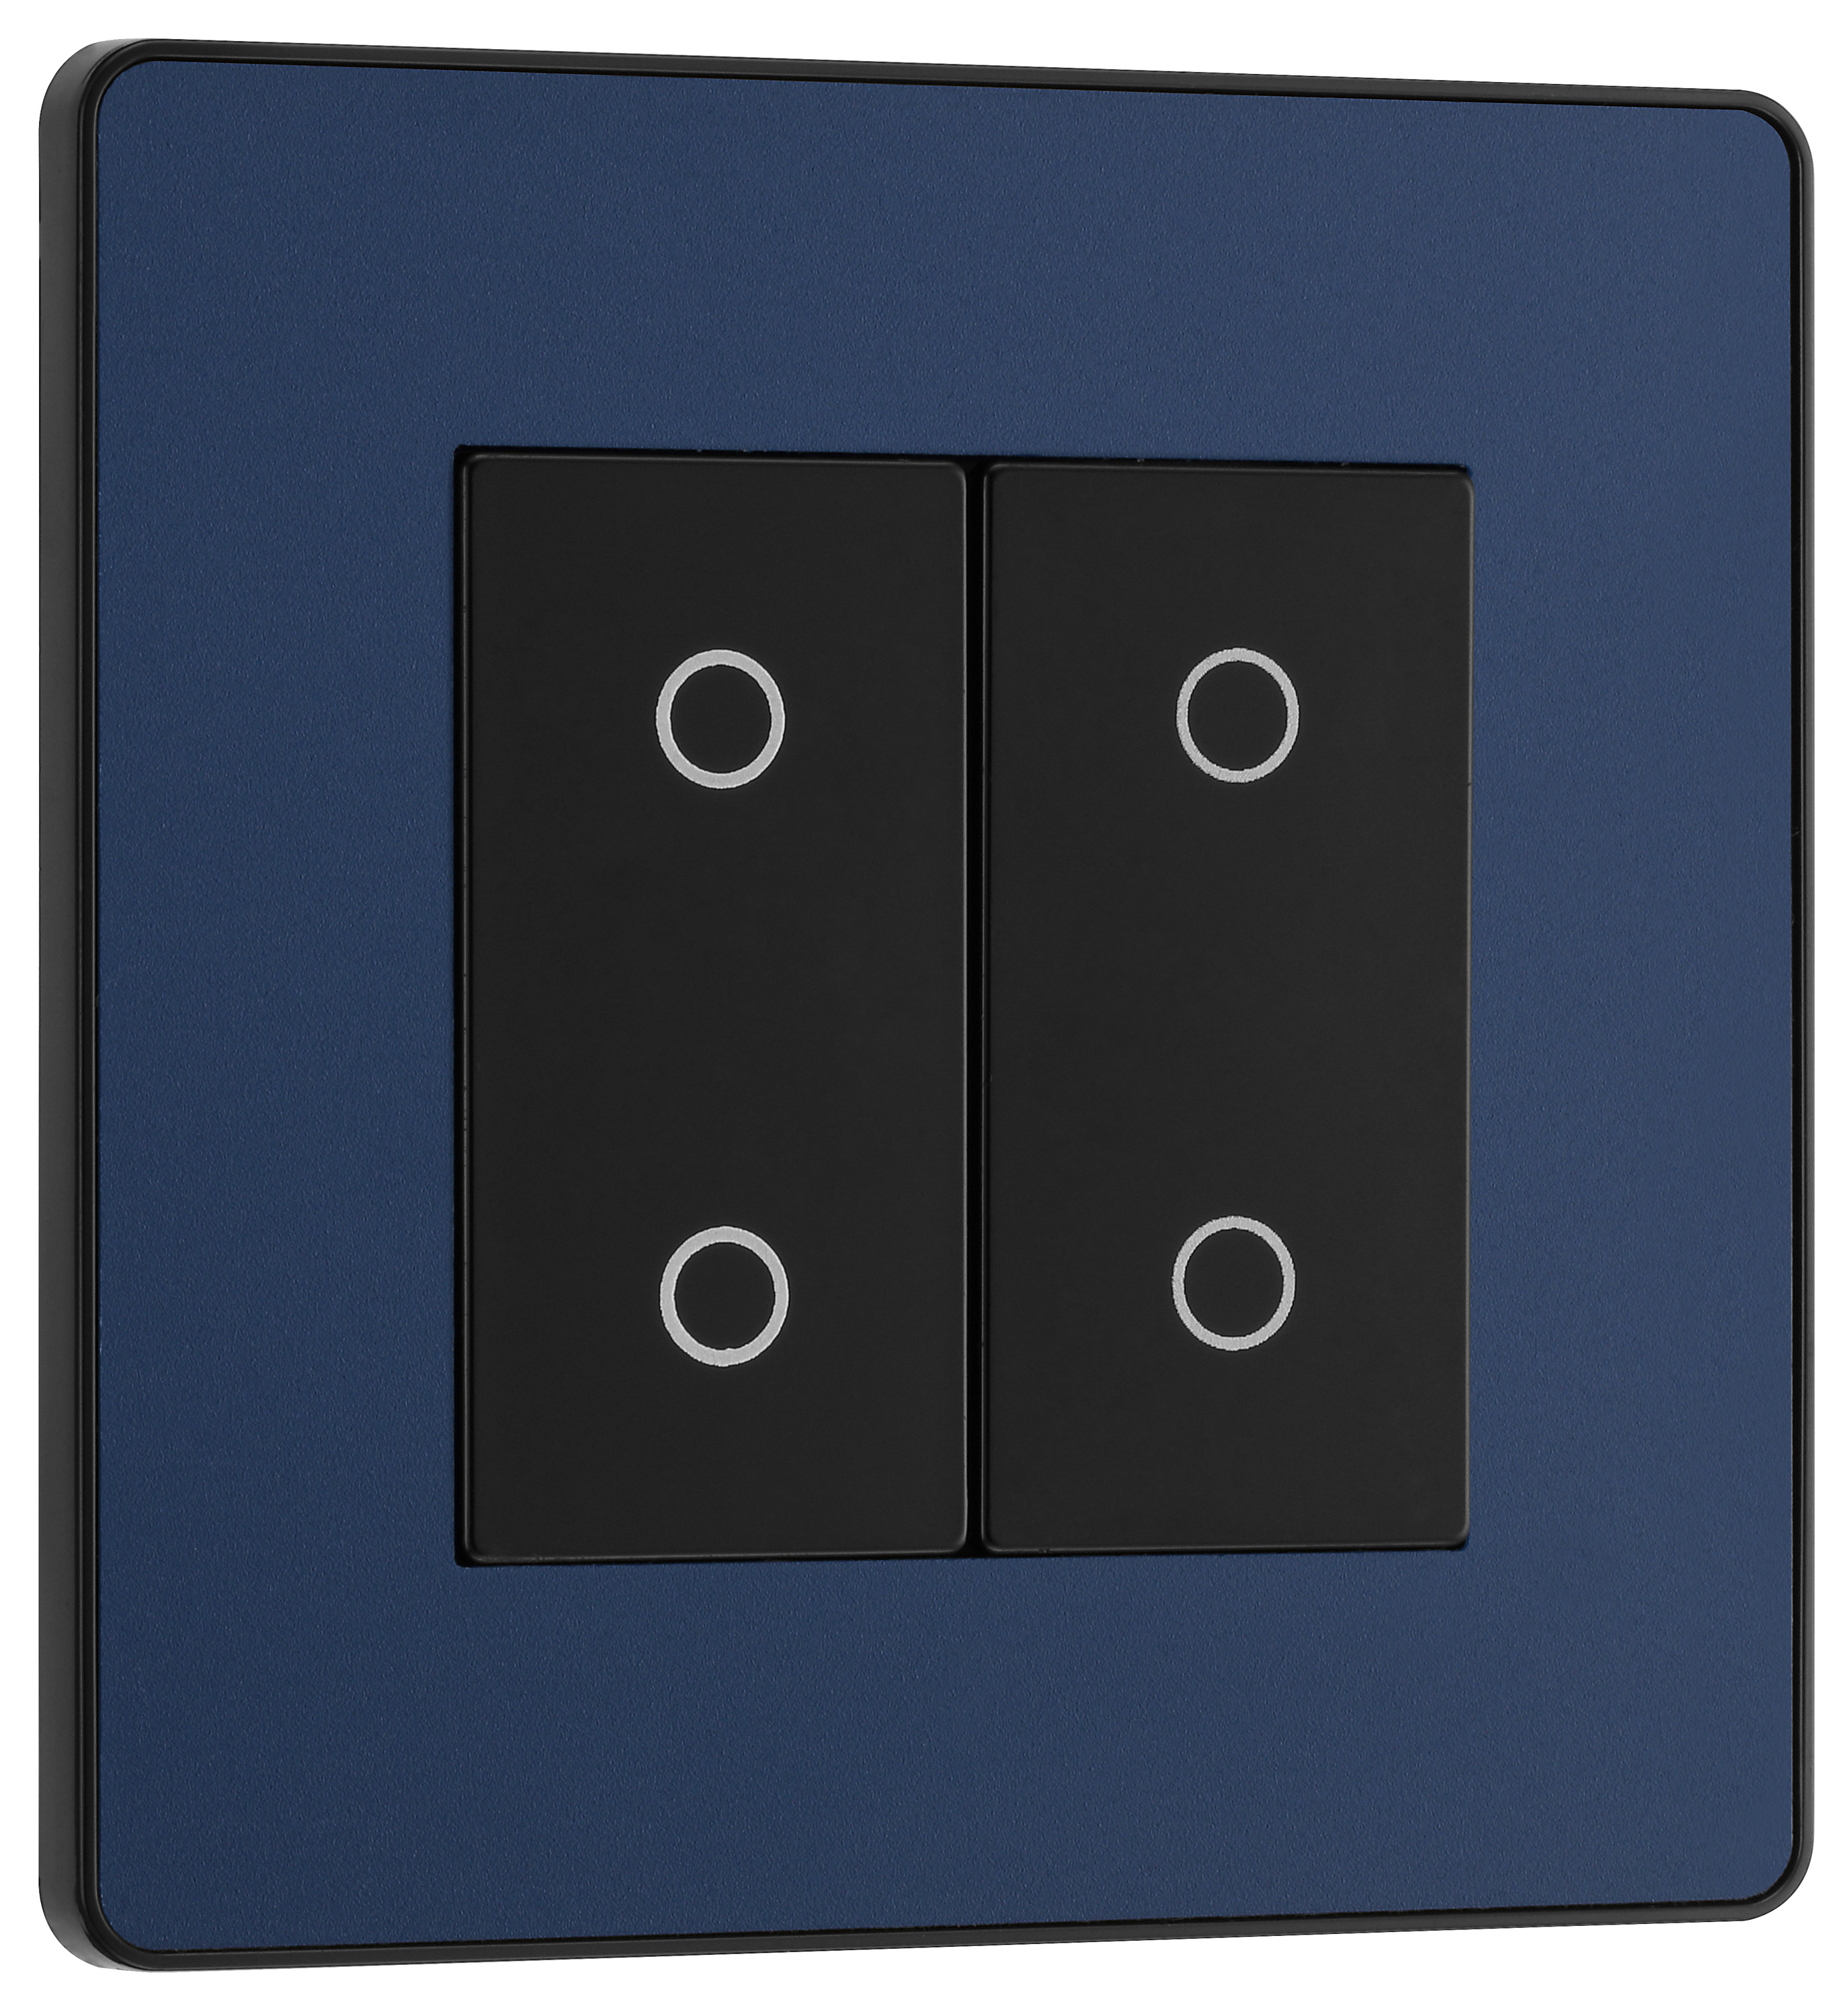 Image of BG Evolve Master Matt Blue 2 Way Double Touch Dimmer Switch - 200W